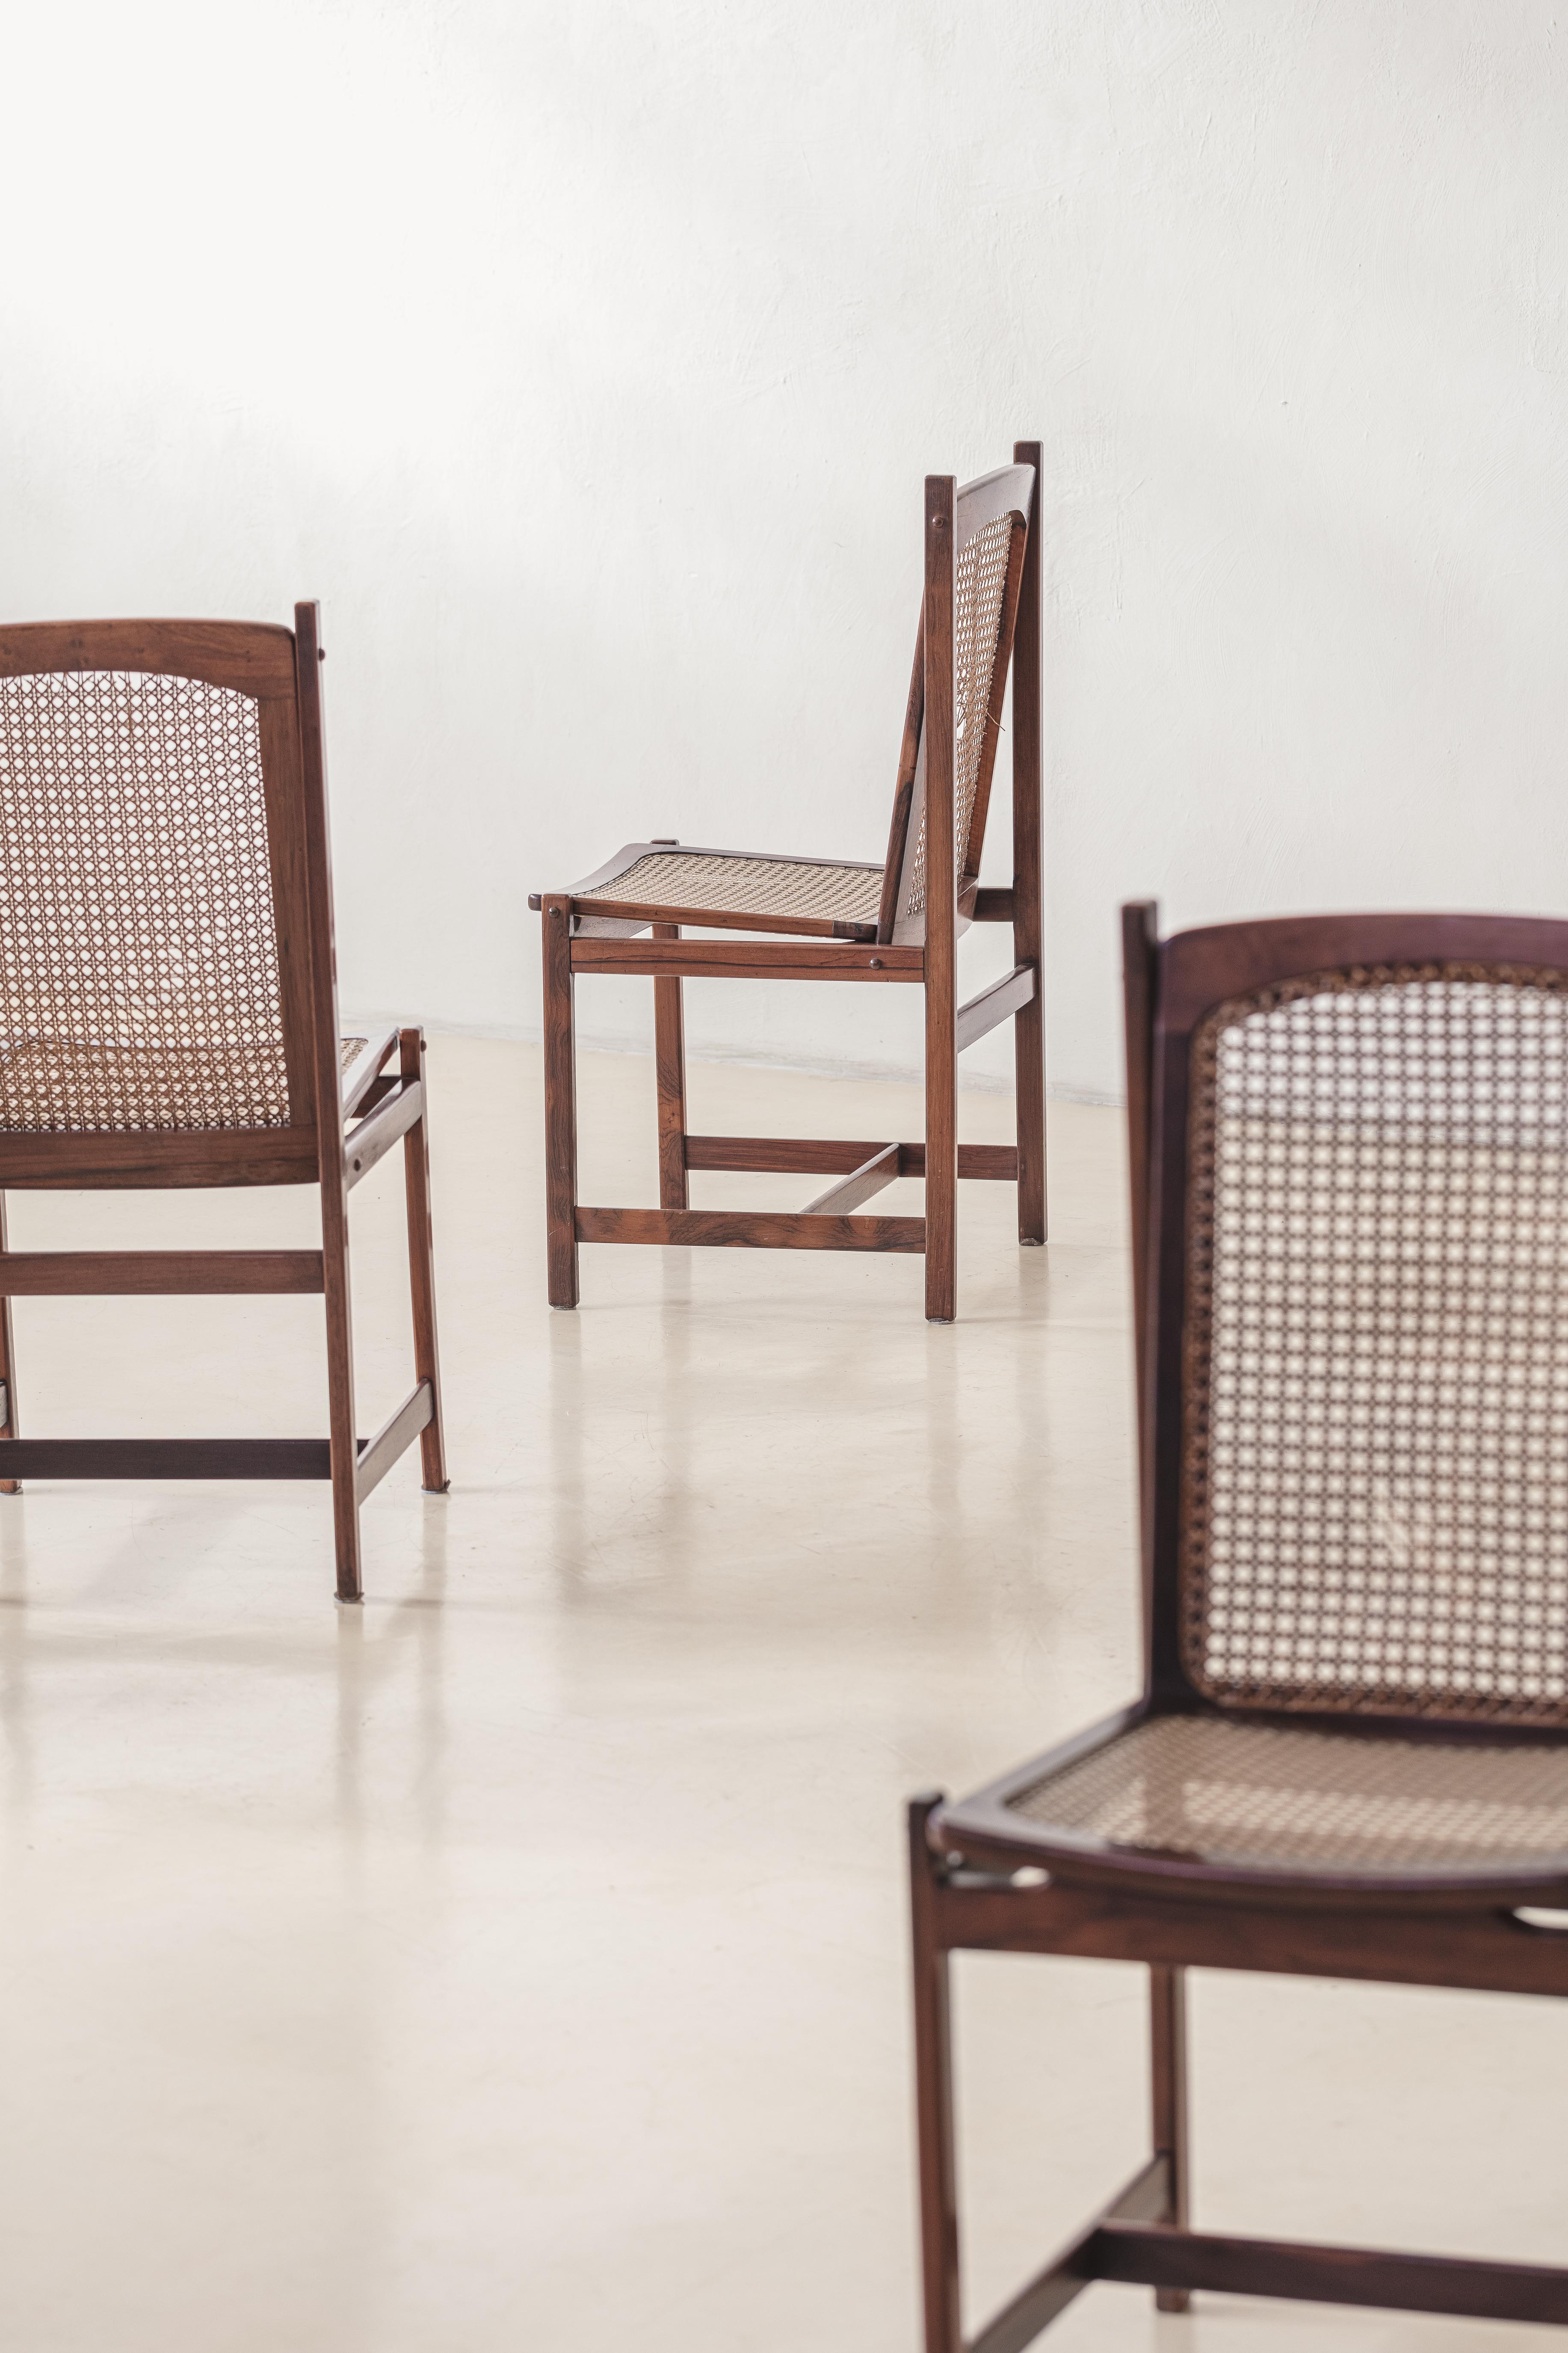 Brazilian Celina Decorações Set of Six Dining Chairs, Rosewood and Cane, Midcentury 1960s For Sale